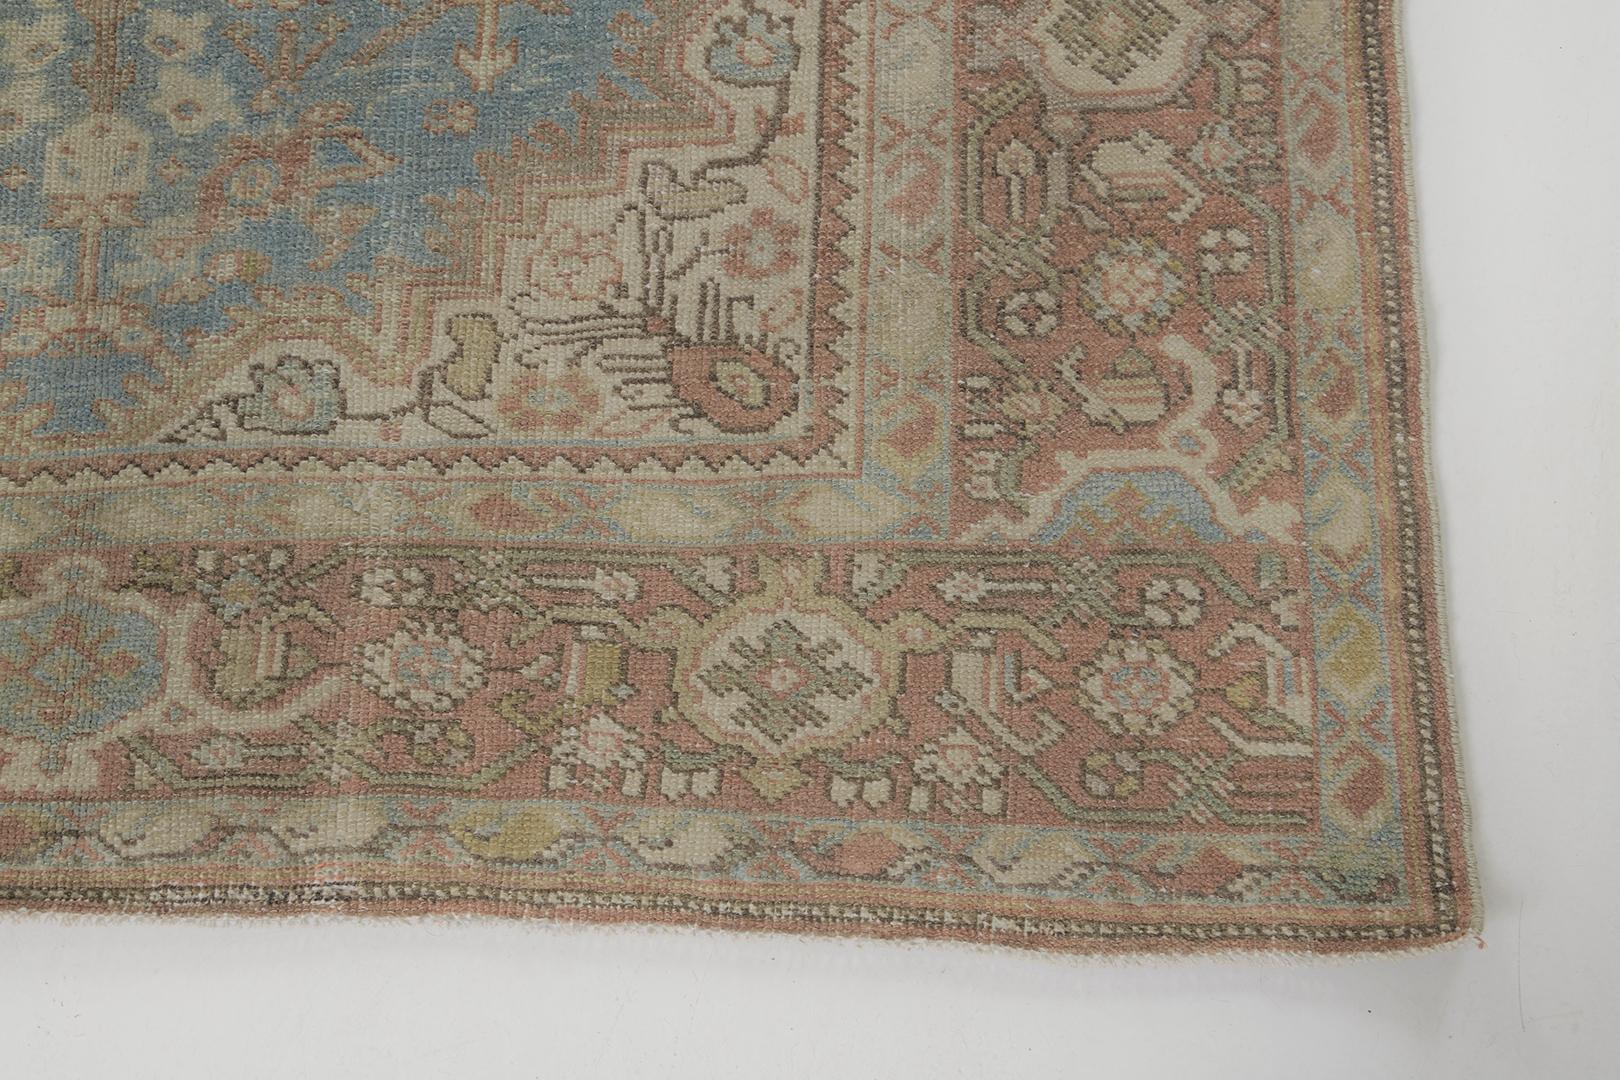 A breathtaking Antique Persian Malayer rug that appears to have a grandiose sense of collaboration that complemented to form a majestic allover dainty botanical motifs. Rendered in stunning warm colour scheme, this mesmerizing rug tells a story from